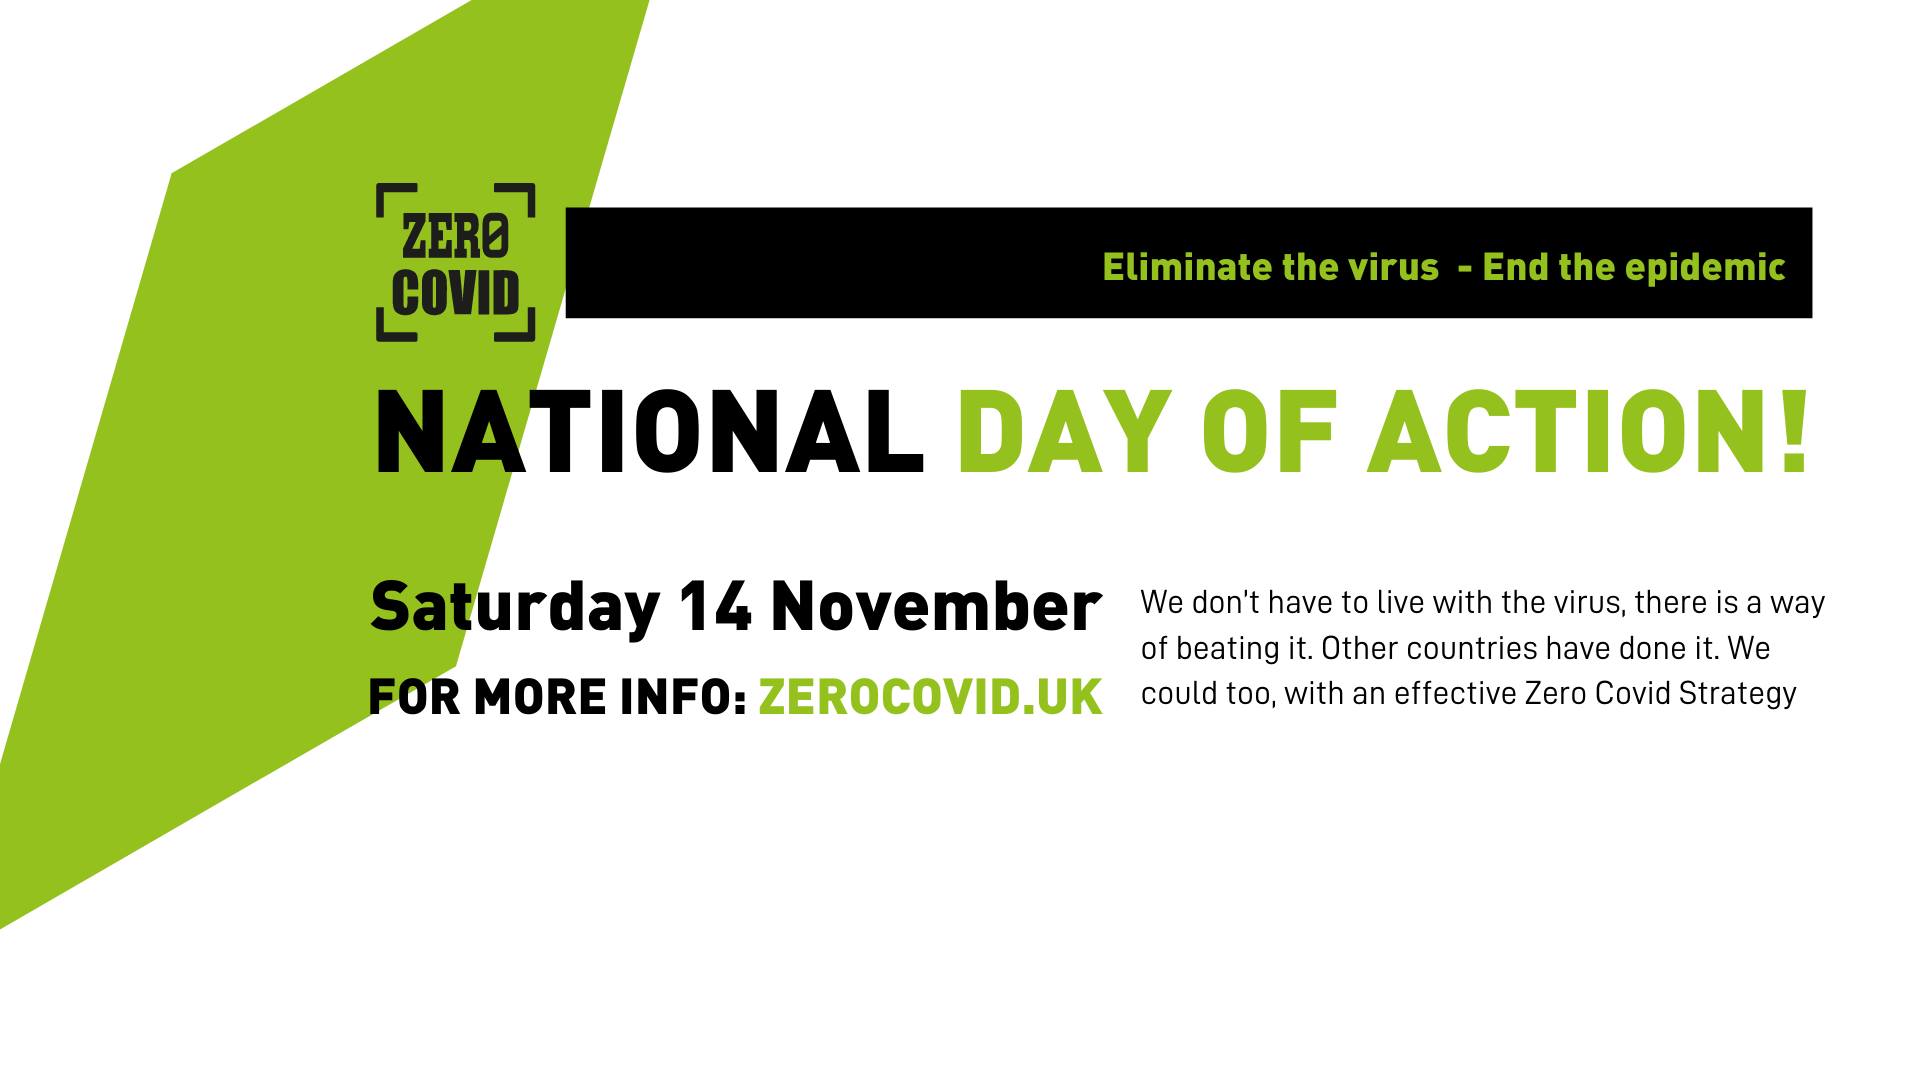 Image advertising the Zero Covid day of action on 14th November